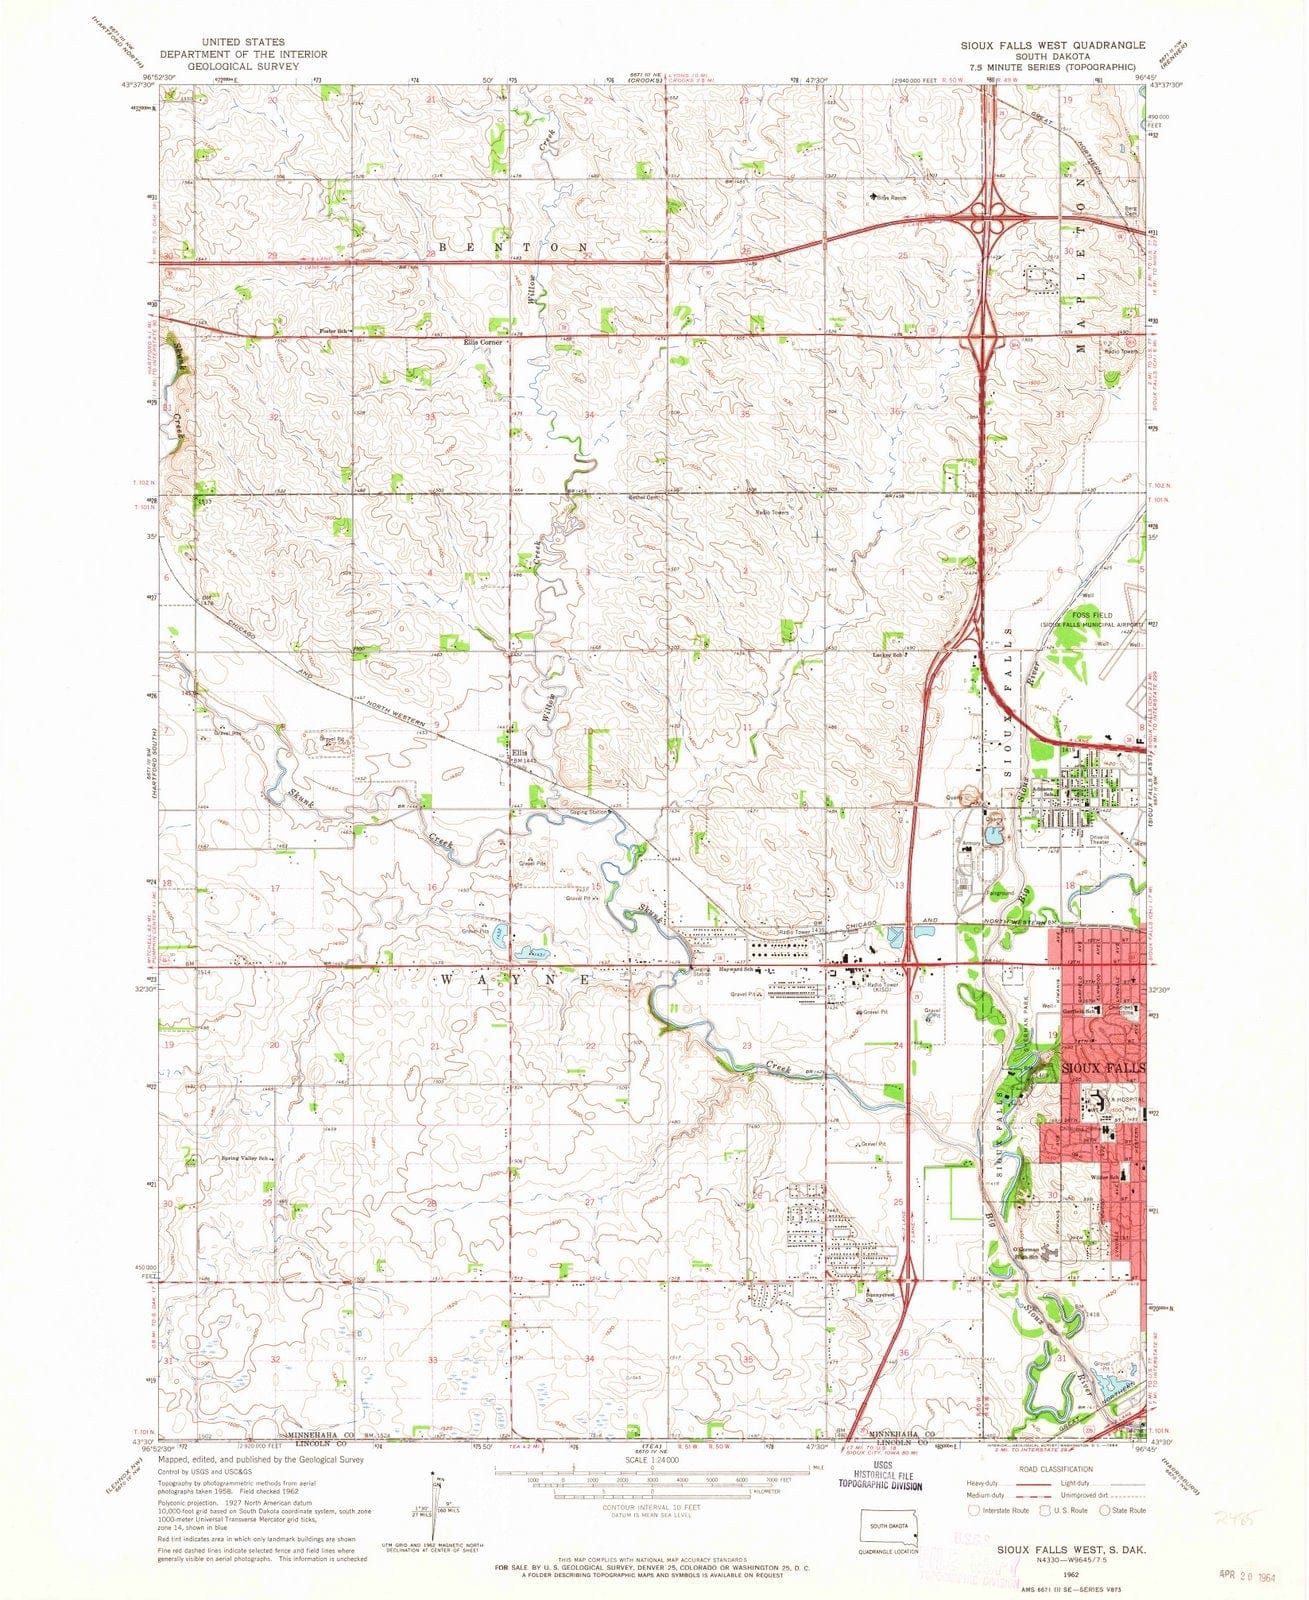 1962 Sioux Falls West, SD - South Dakota - USGS Topographic Map